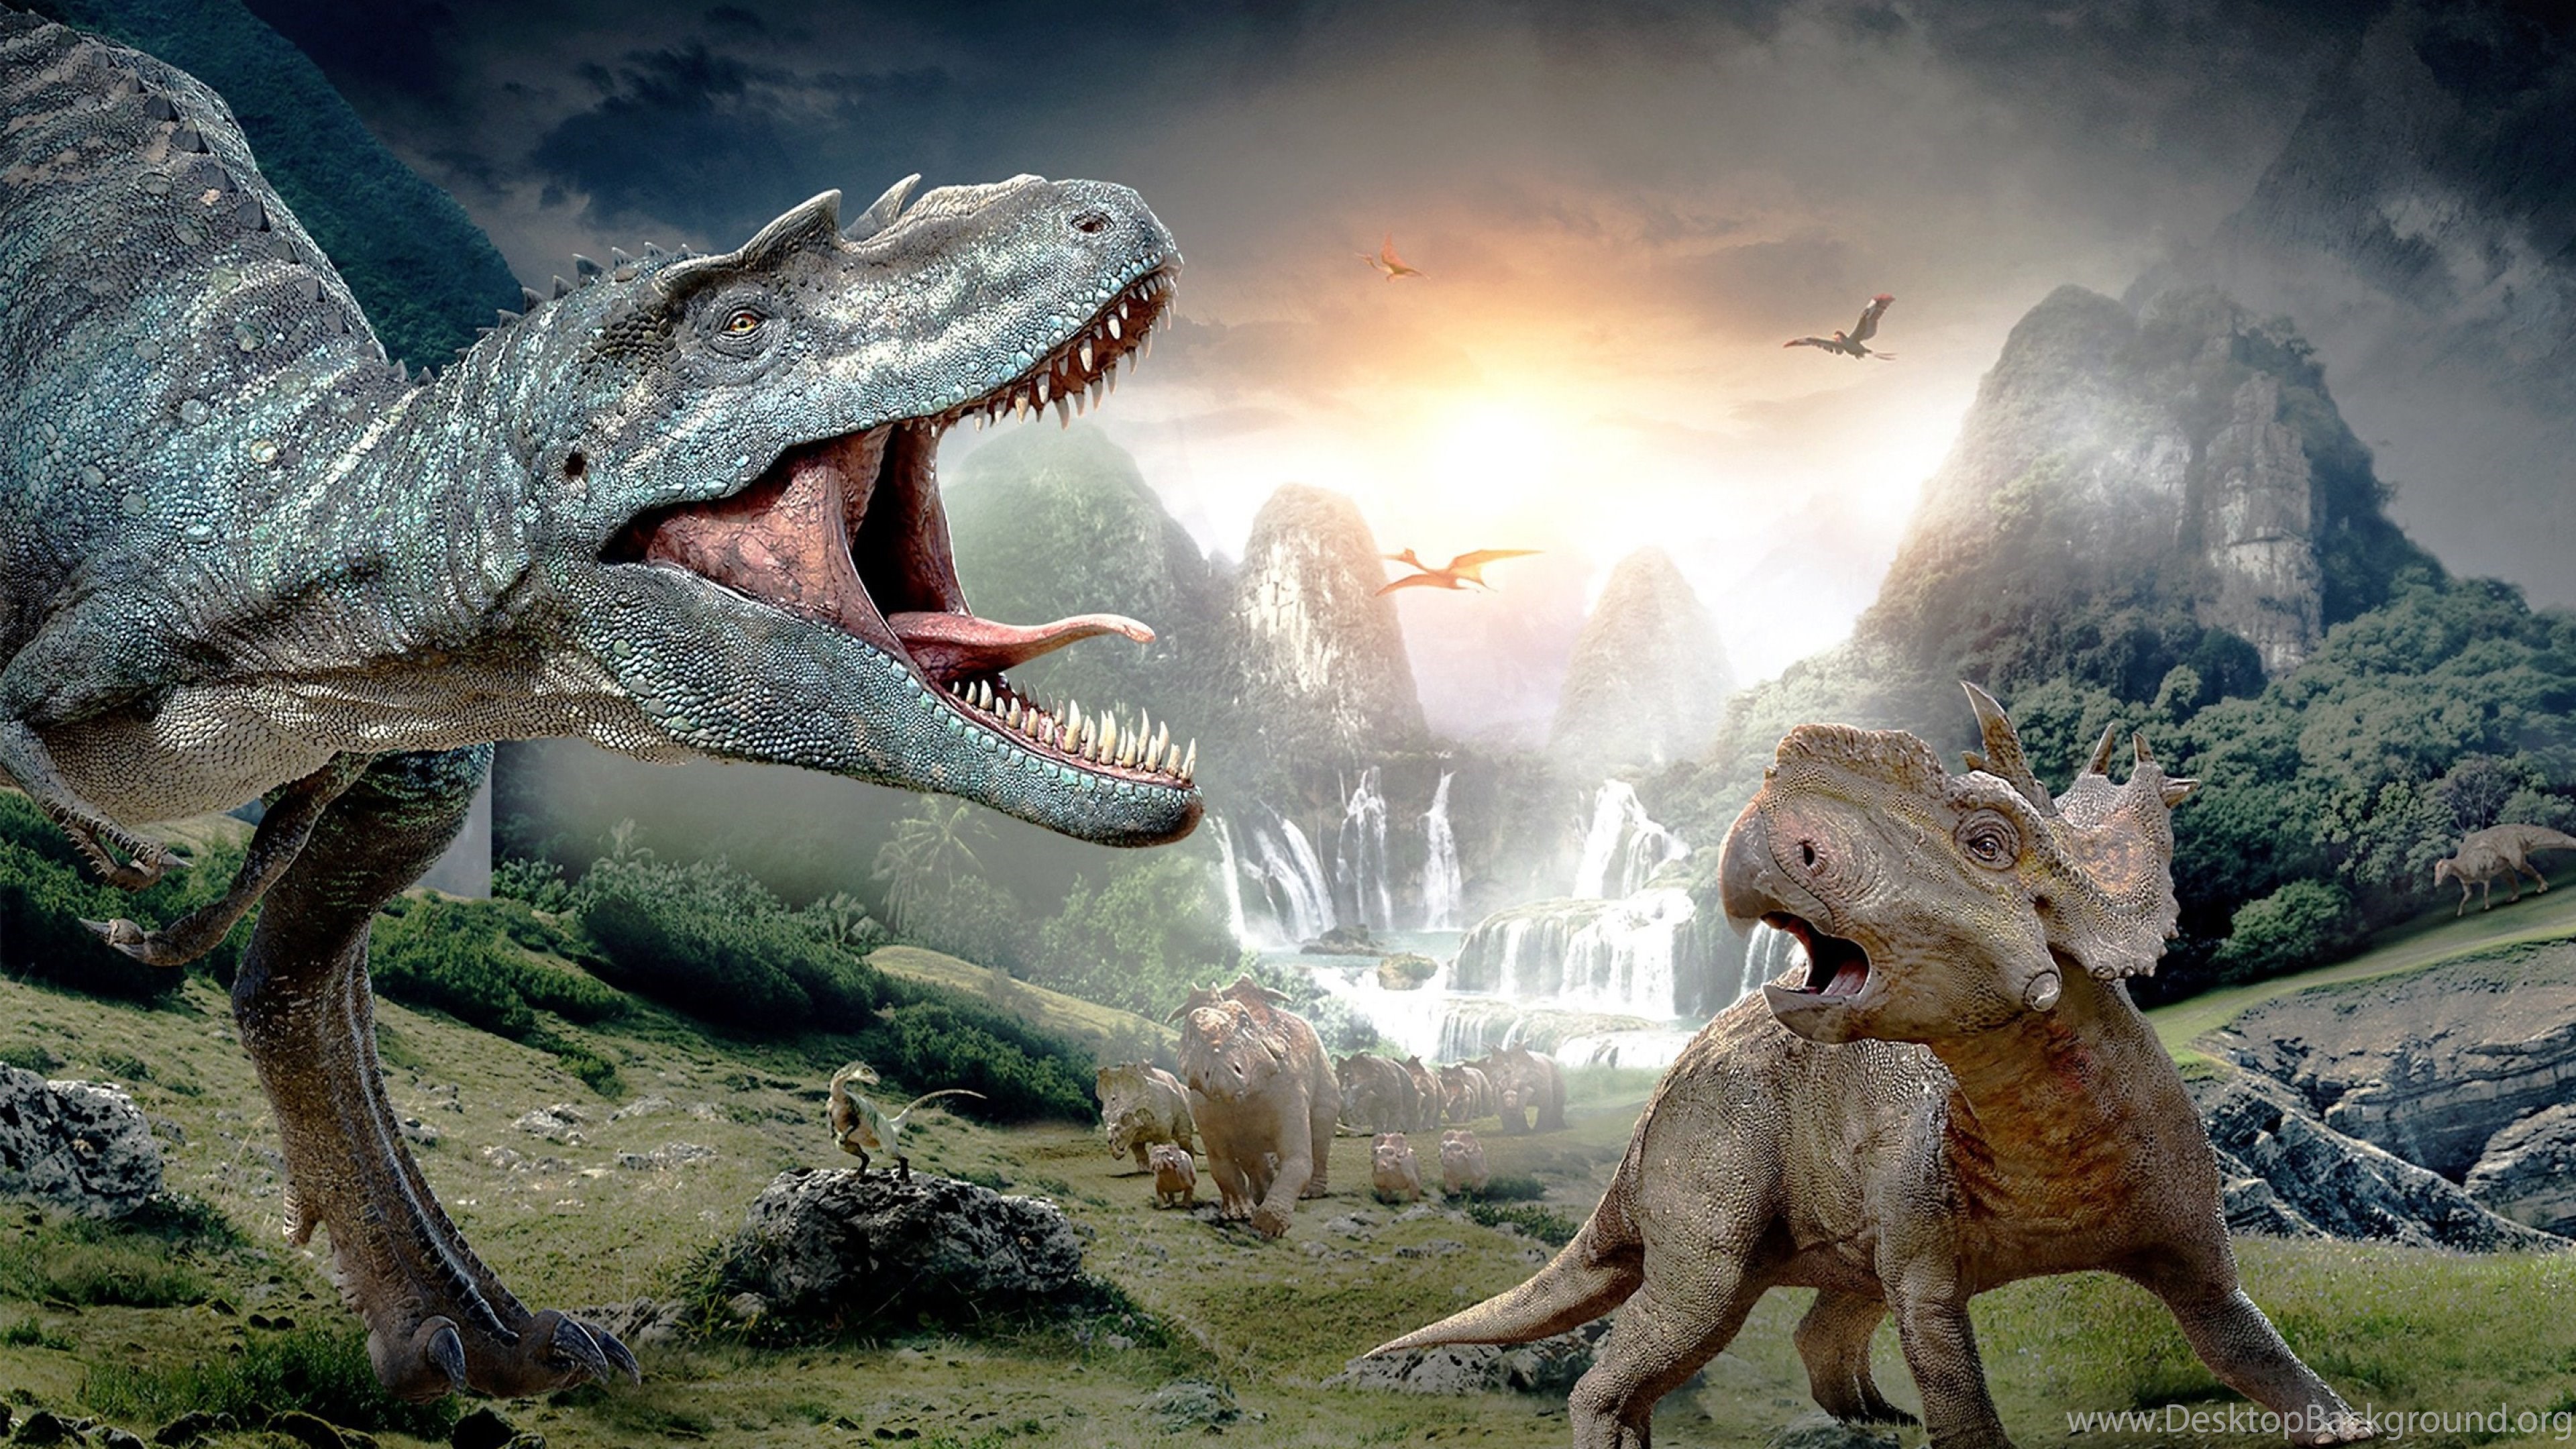 734671_walking-with-dinosaurs (3840x2160, 1587 kБ)